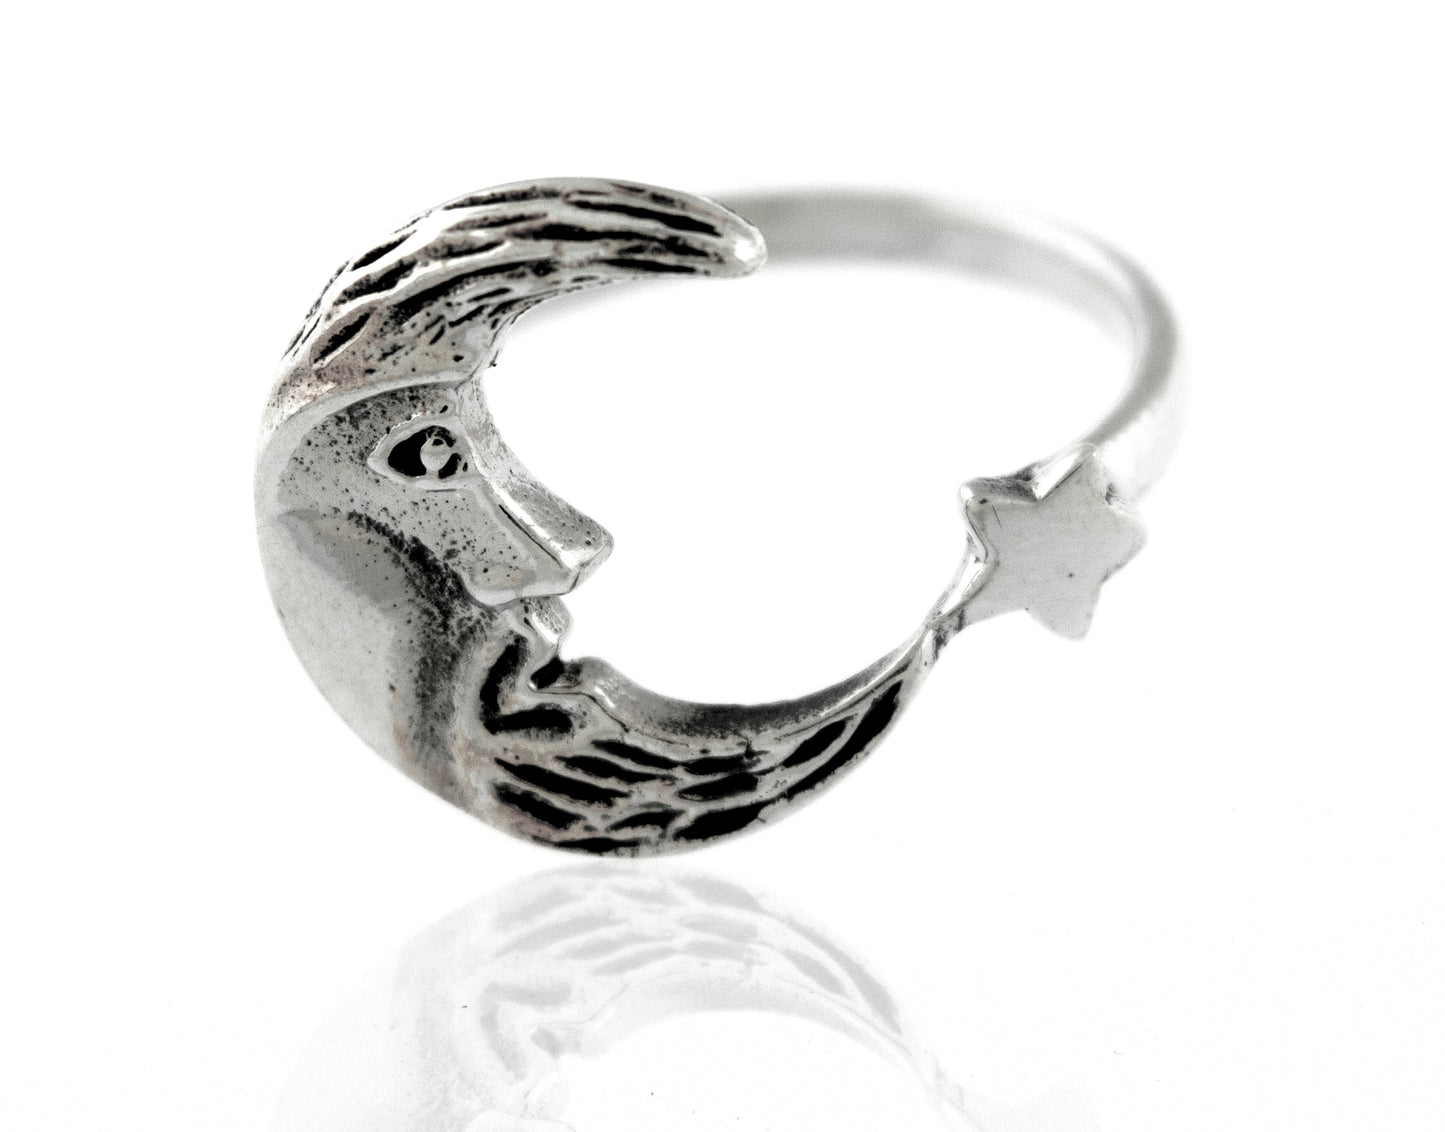 A Super Silver Crescent Moon and Star Ring with a crescent moon and star design.